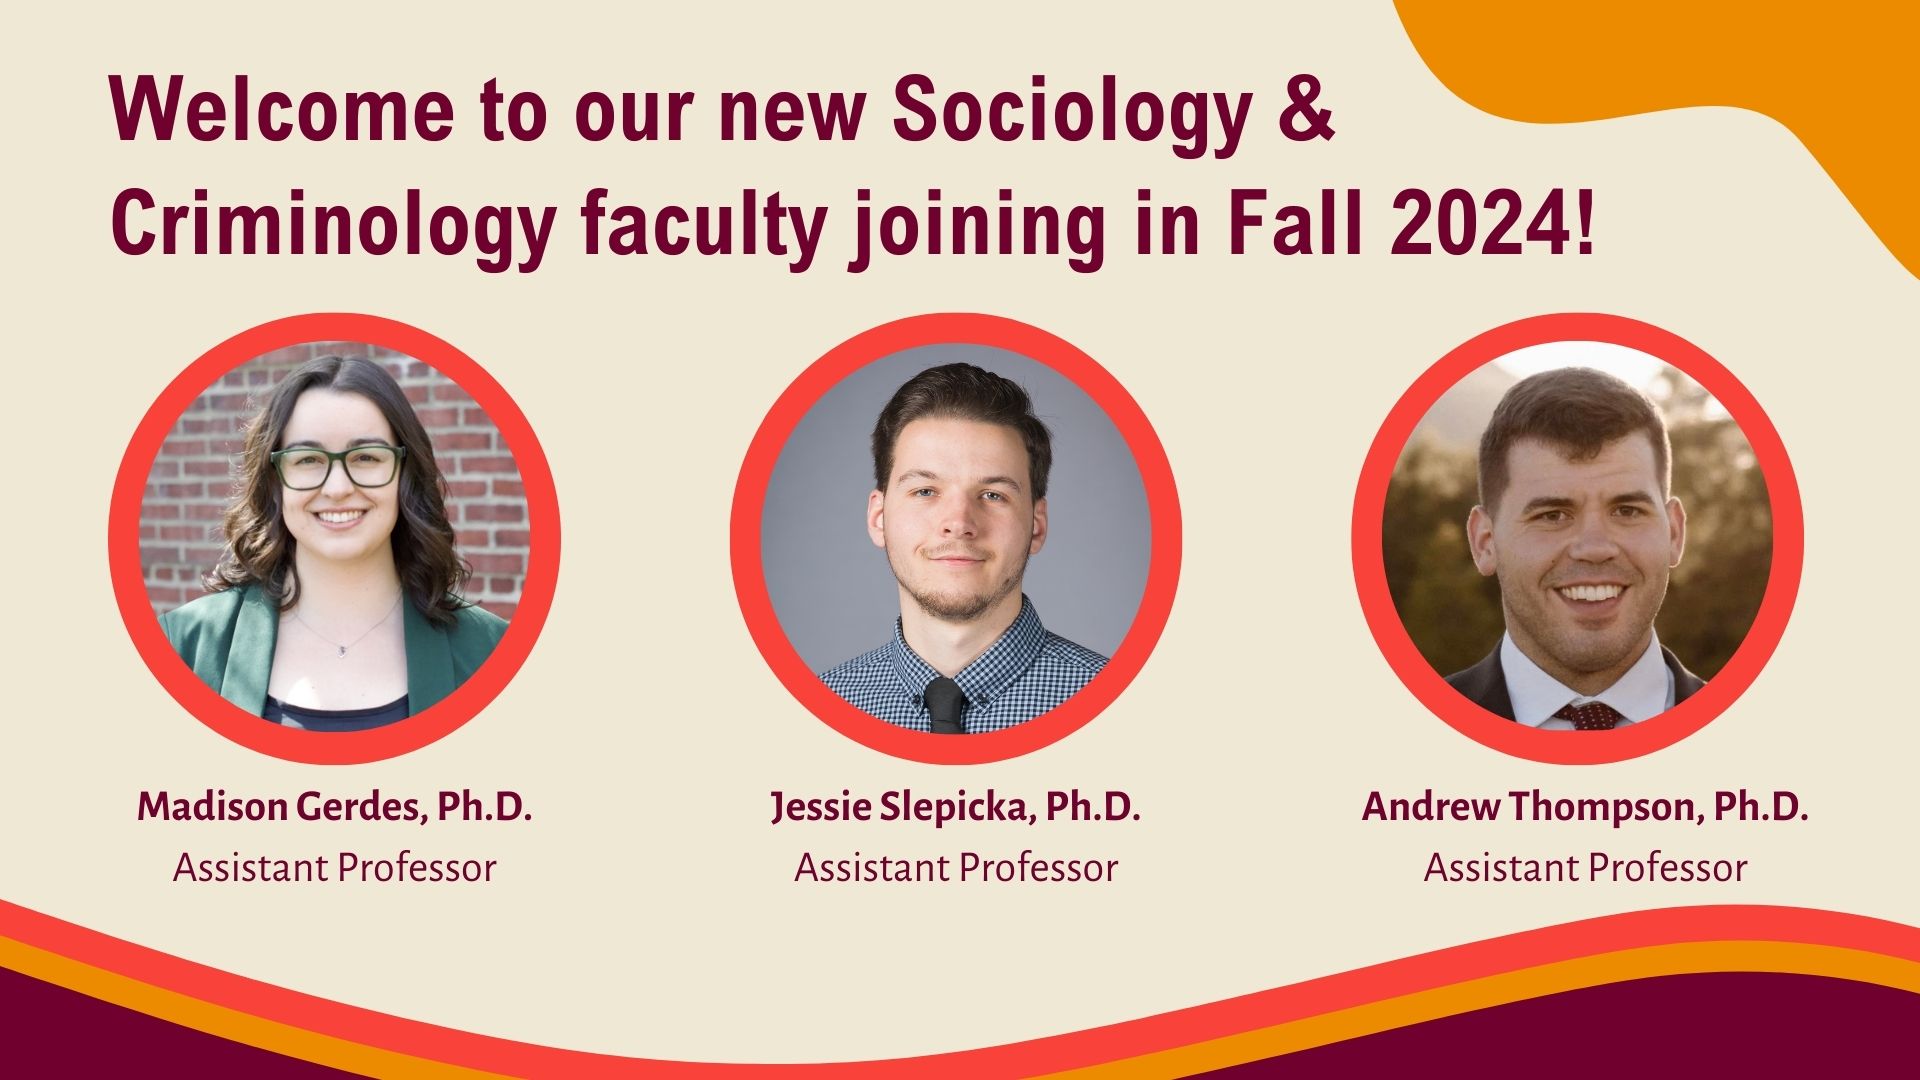 Three new faculty are joining the department in Fall 2024.